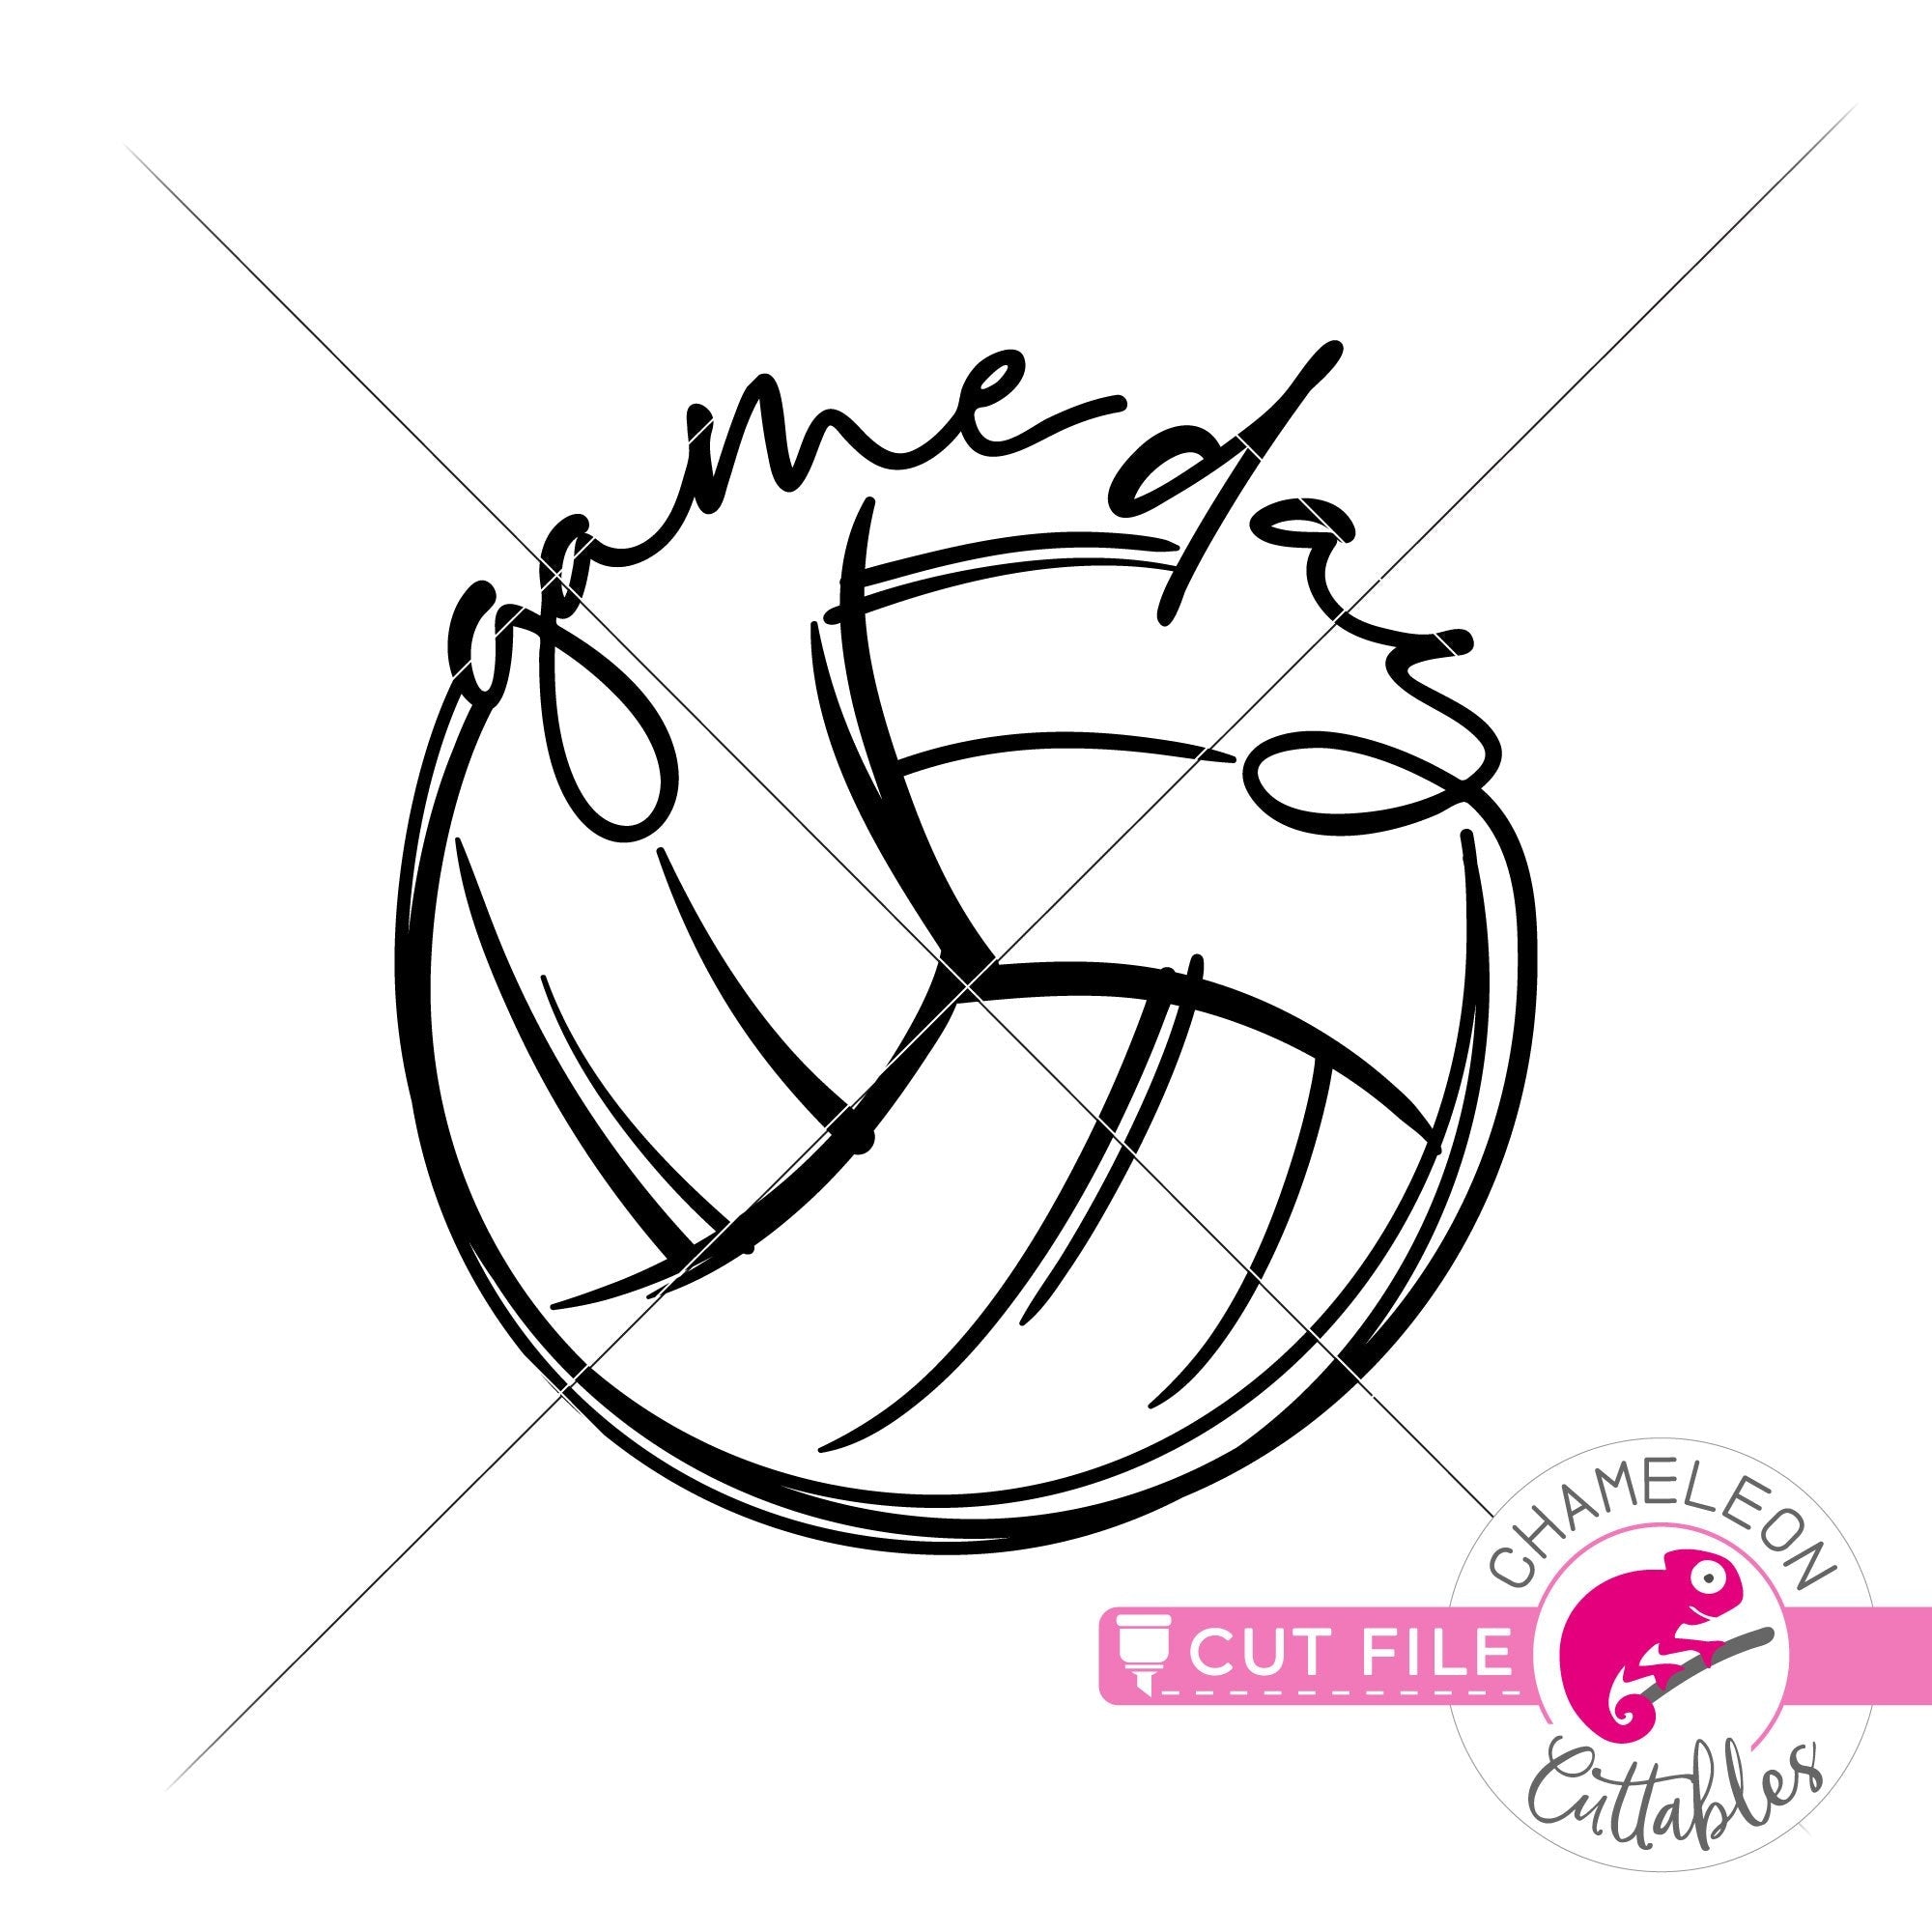 The Volleyball Player Hits The Ball With His Hands Folded Together Sketch  Vector Icon A Man Plays A Team Sports Game Isolated White Background Stock  Illustration - Download Image Now - iStock